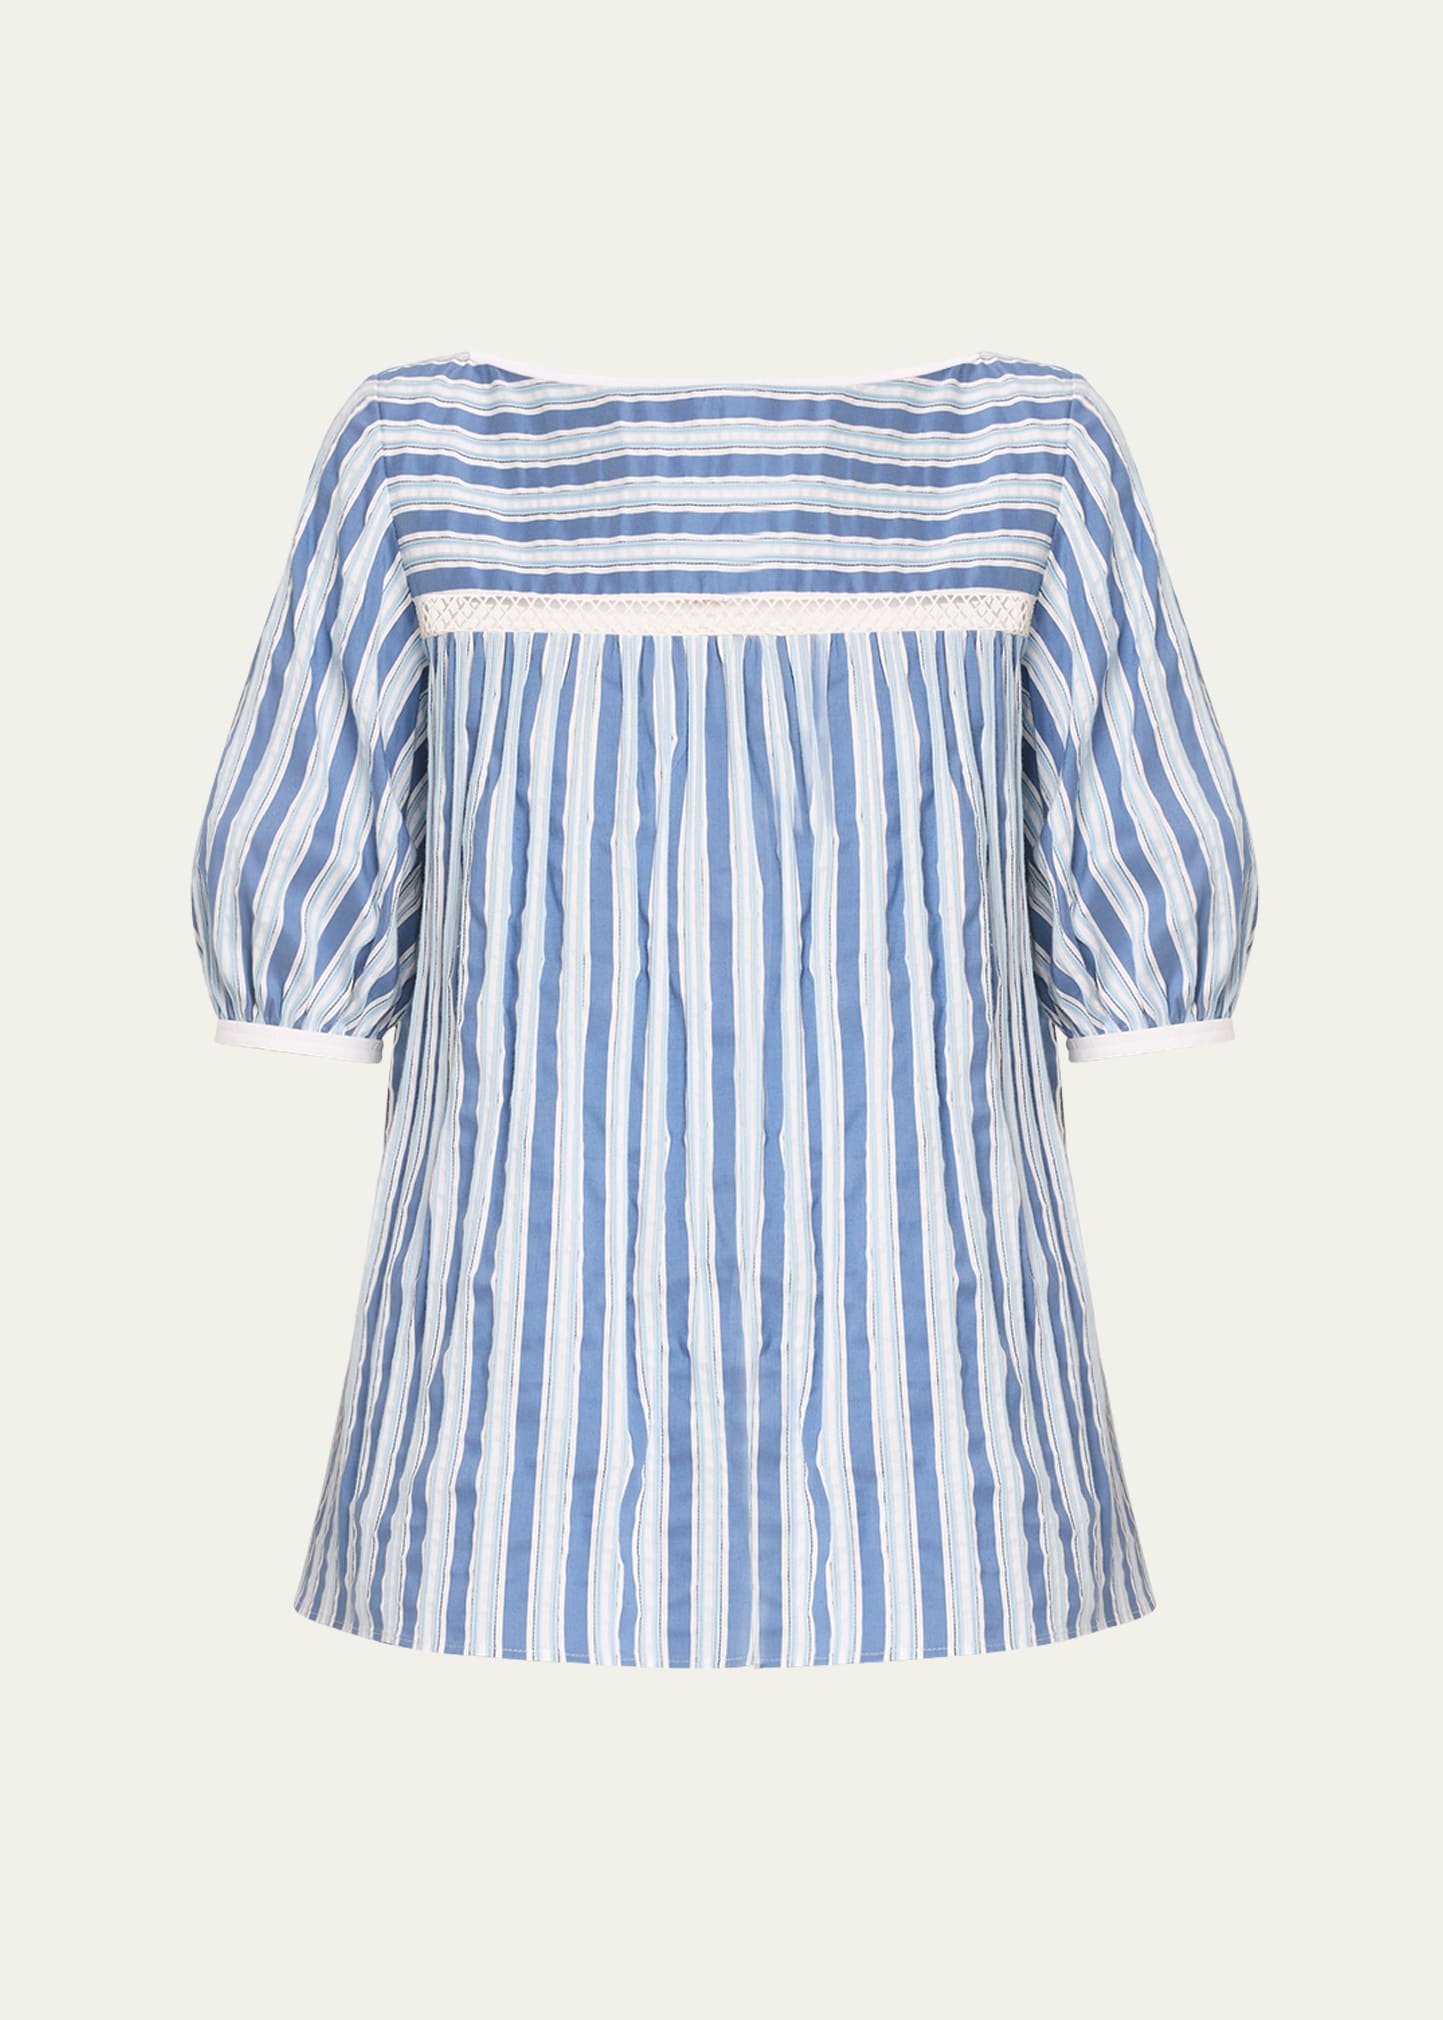 Chloé Embroidered Striped Cotton And Silk-blend Poplin Top In Blue - White 1